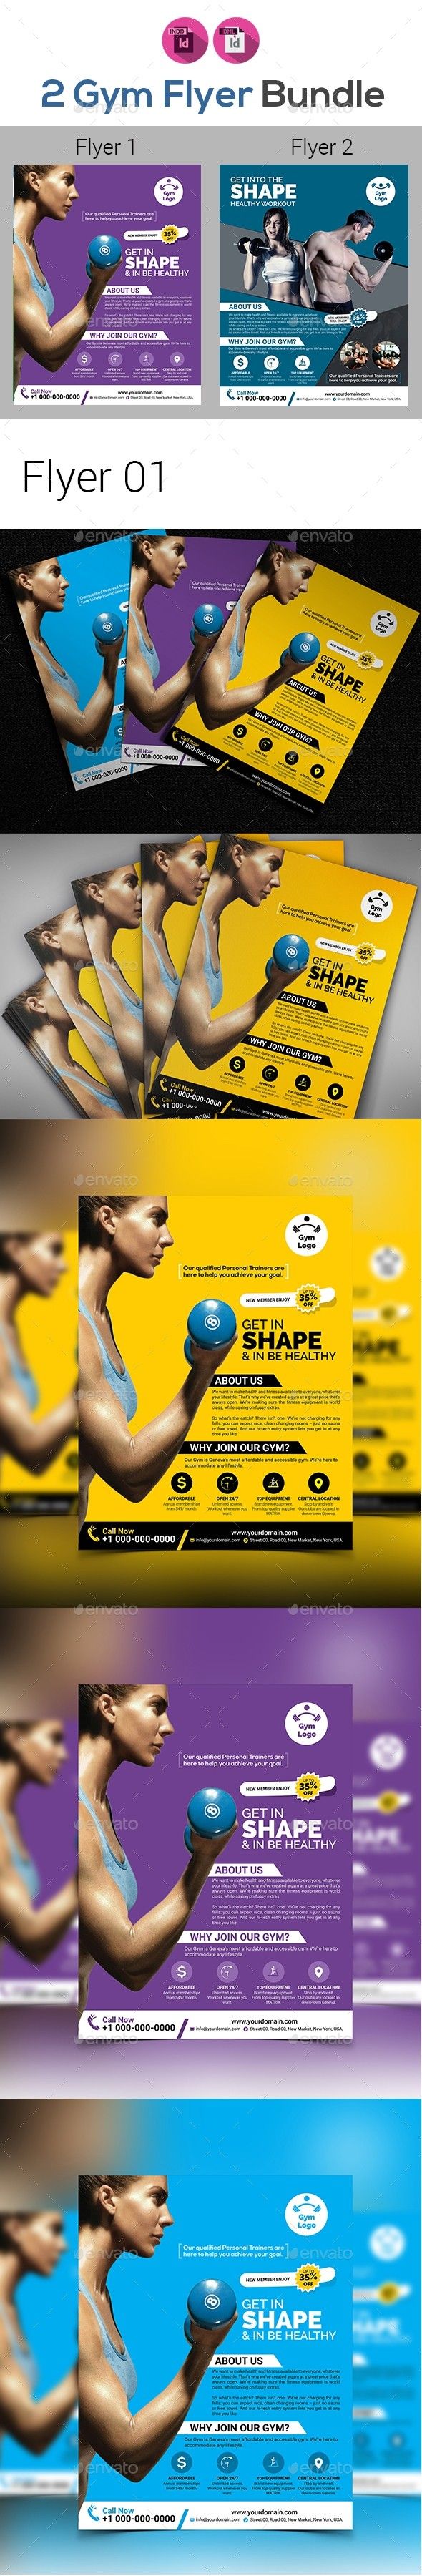 1539369915_390_Healthcare-Advertising-ad-advertising-body-colorful-energy-fit-fitness-fitness-center-fitness-f Healthcare Advertising : ad, advertising, body, colorful, energy, fit, fitness, fitness center, fitness f...